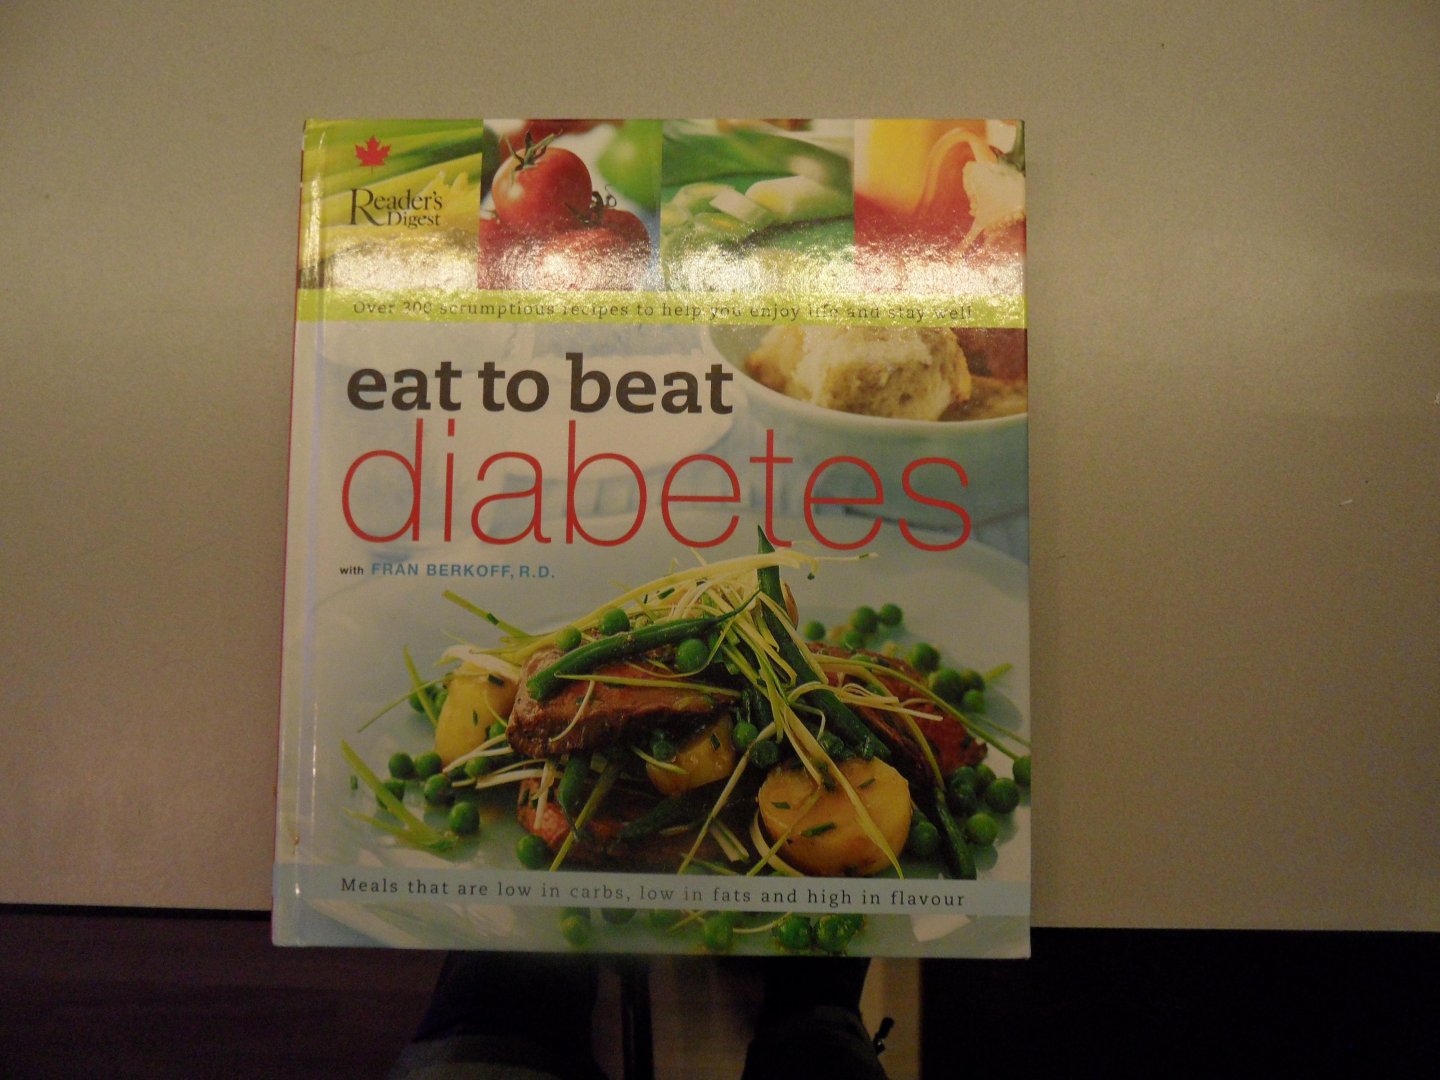 Berkoff, Fran - Eat to beat diabetes. Meals that are low in carbs low in fats and high in flavour